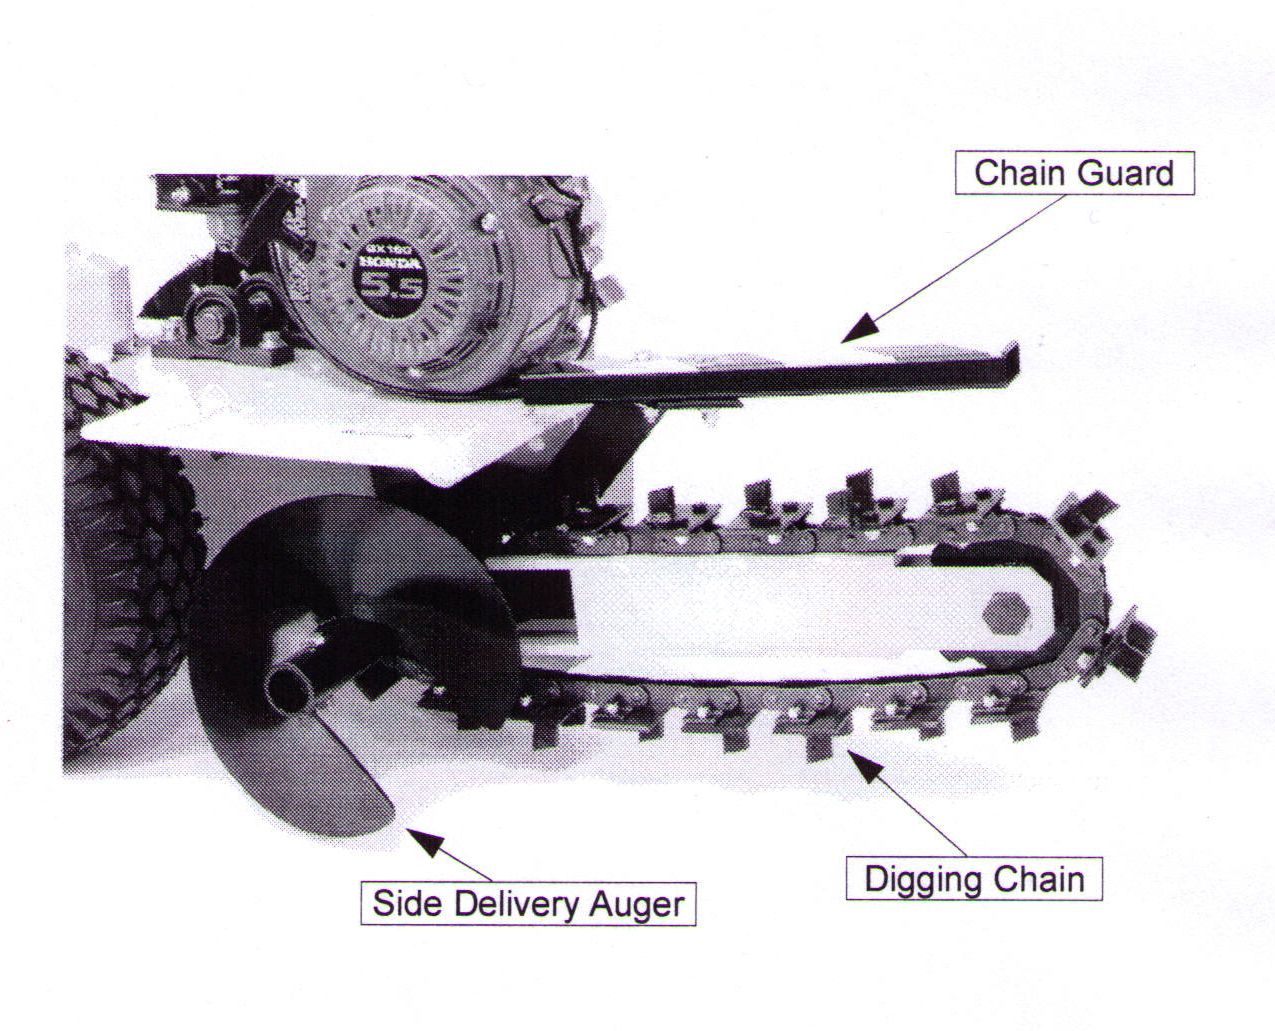 Side Delivery Auger And Chain Guard Shown, Chain Shown Has Shark Style Digging Teeth